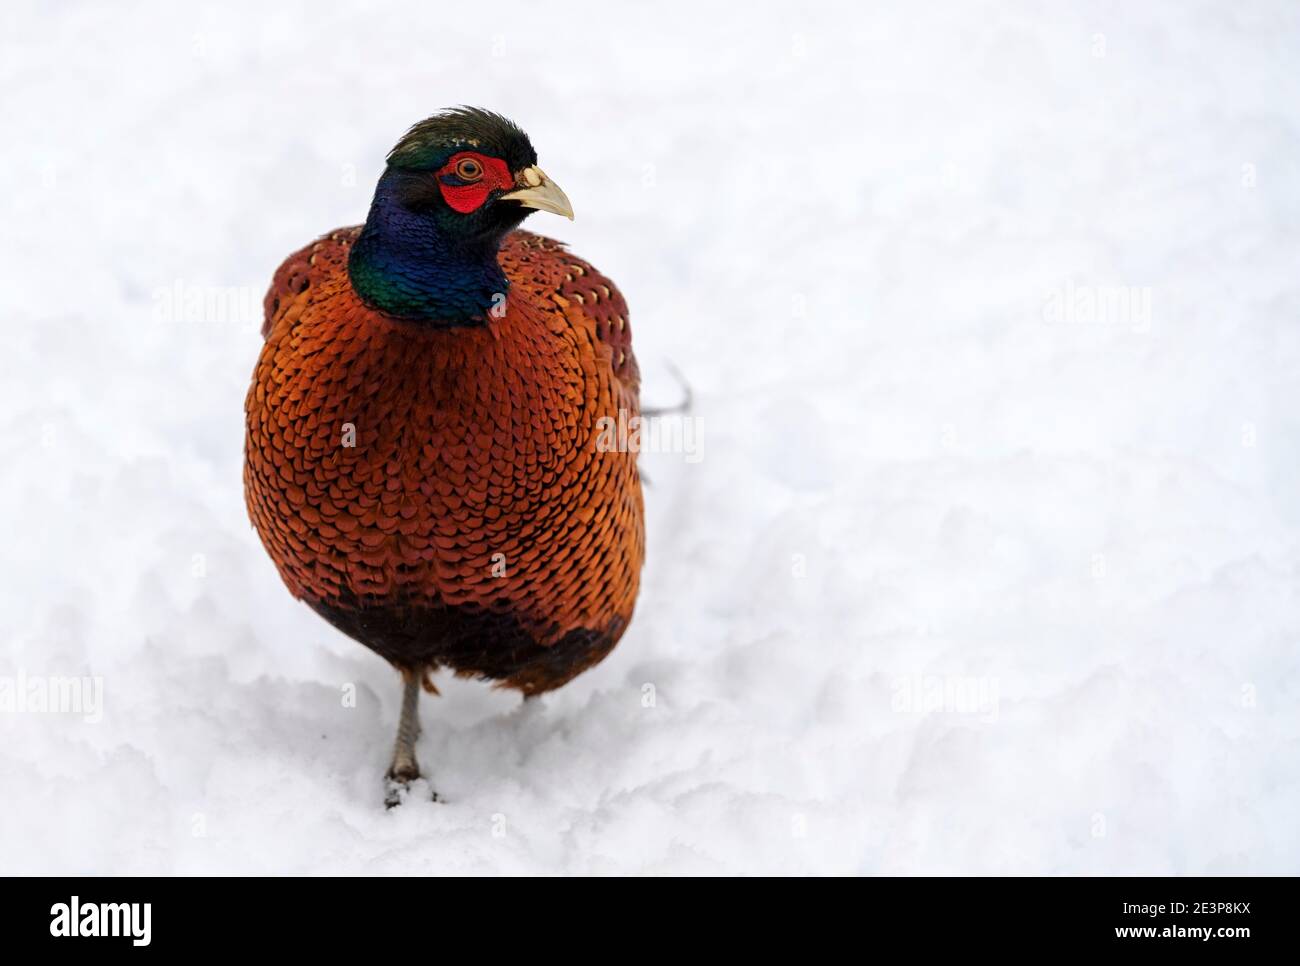 Male pheasant (Phasianus colchicus) in the snow, South Lanarkshire, Scotland Stock Photo